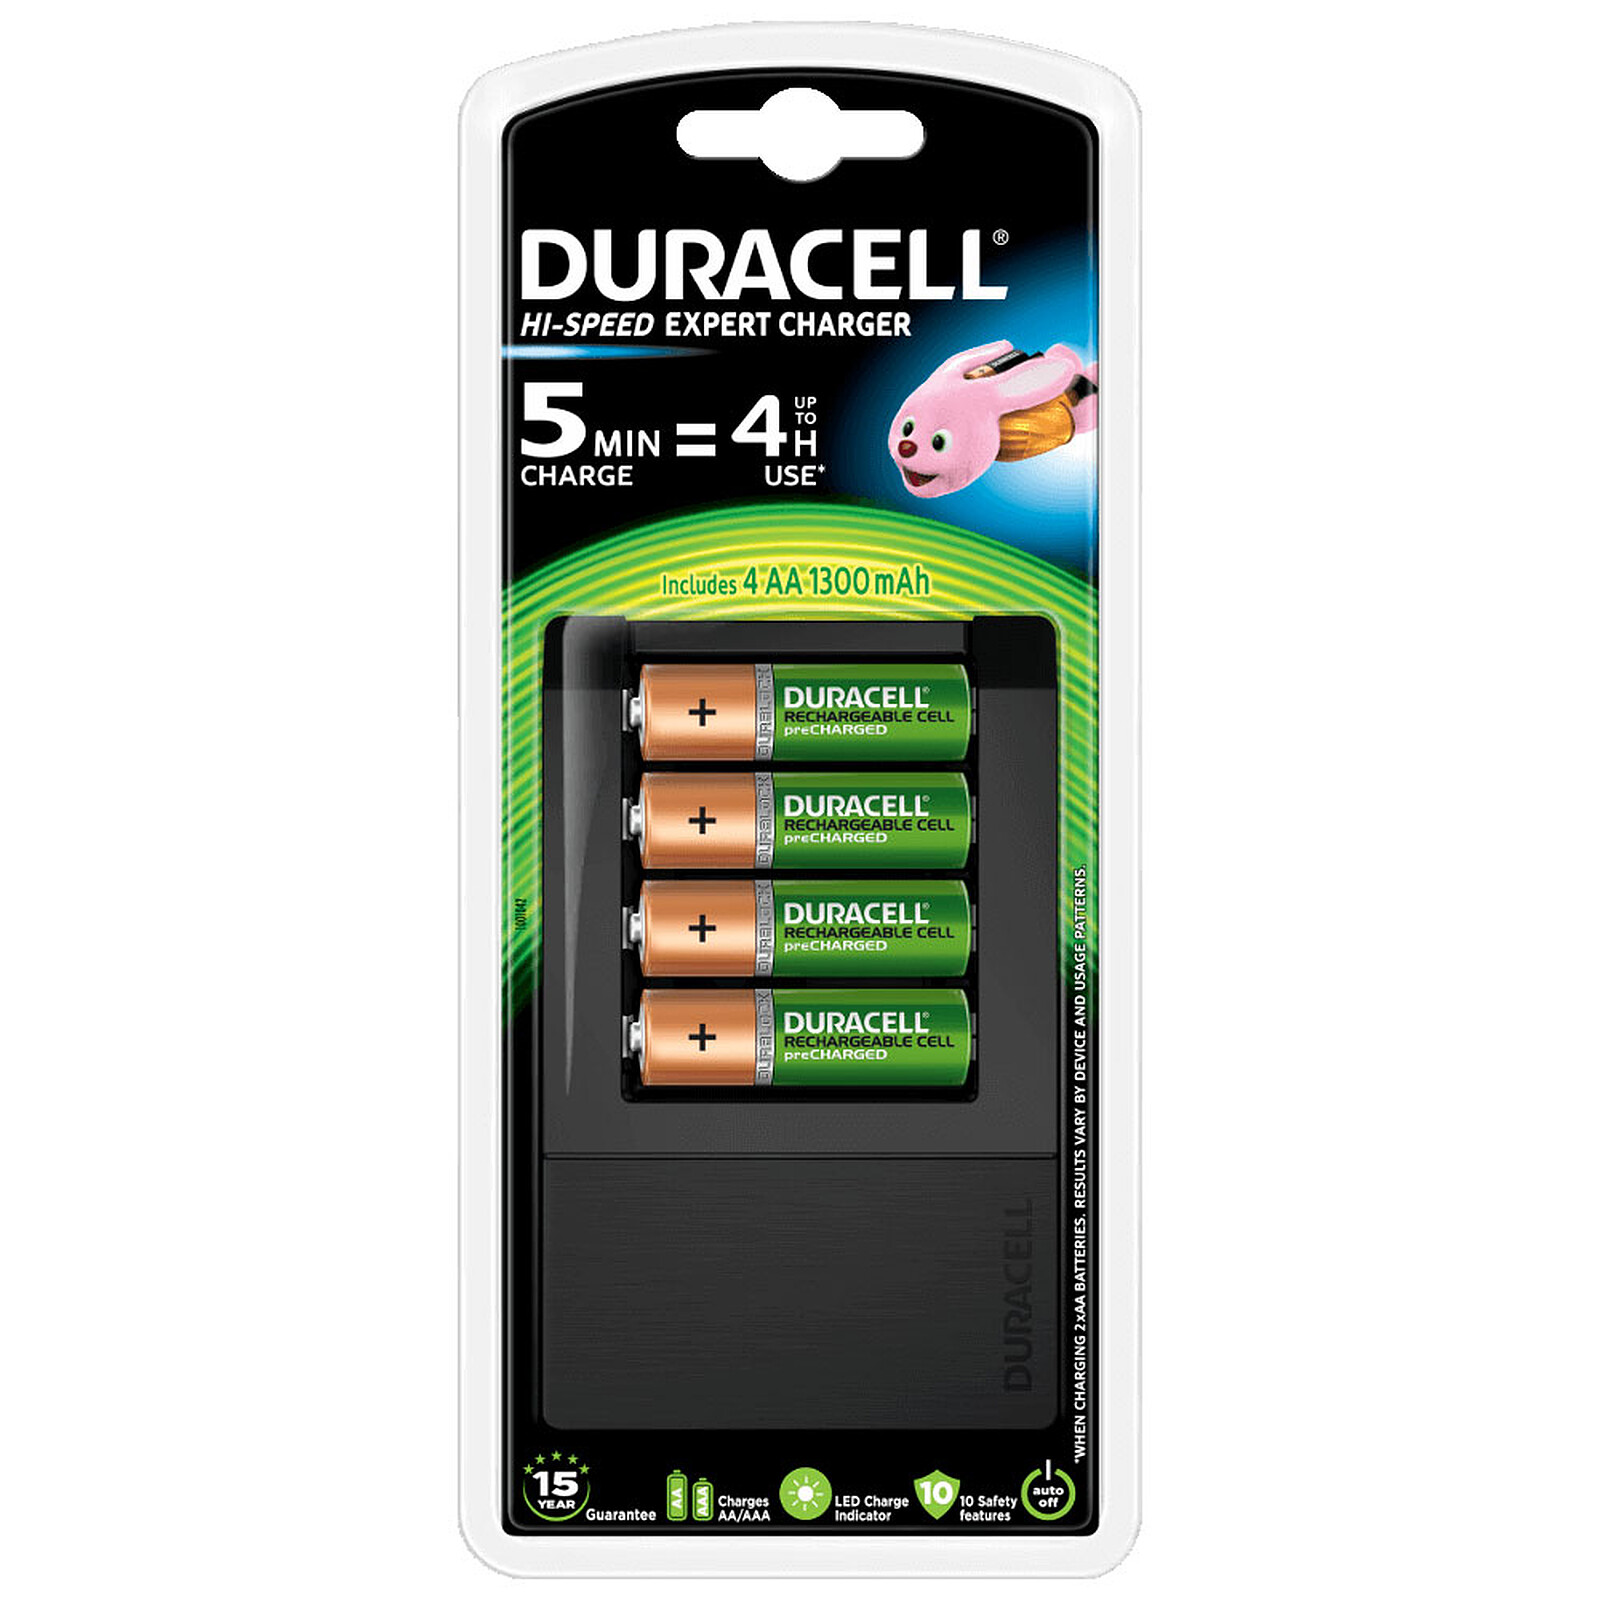 Duracell Hi-Speed Expert Charger - Battery & charger DURACELL on LDLC